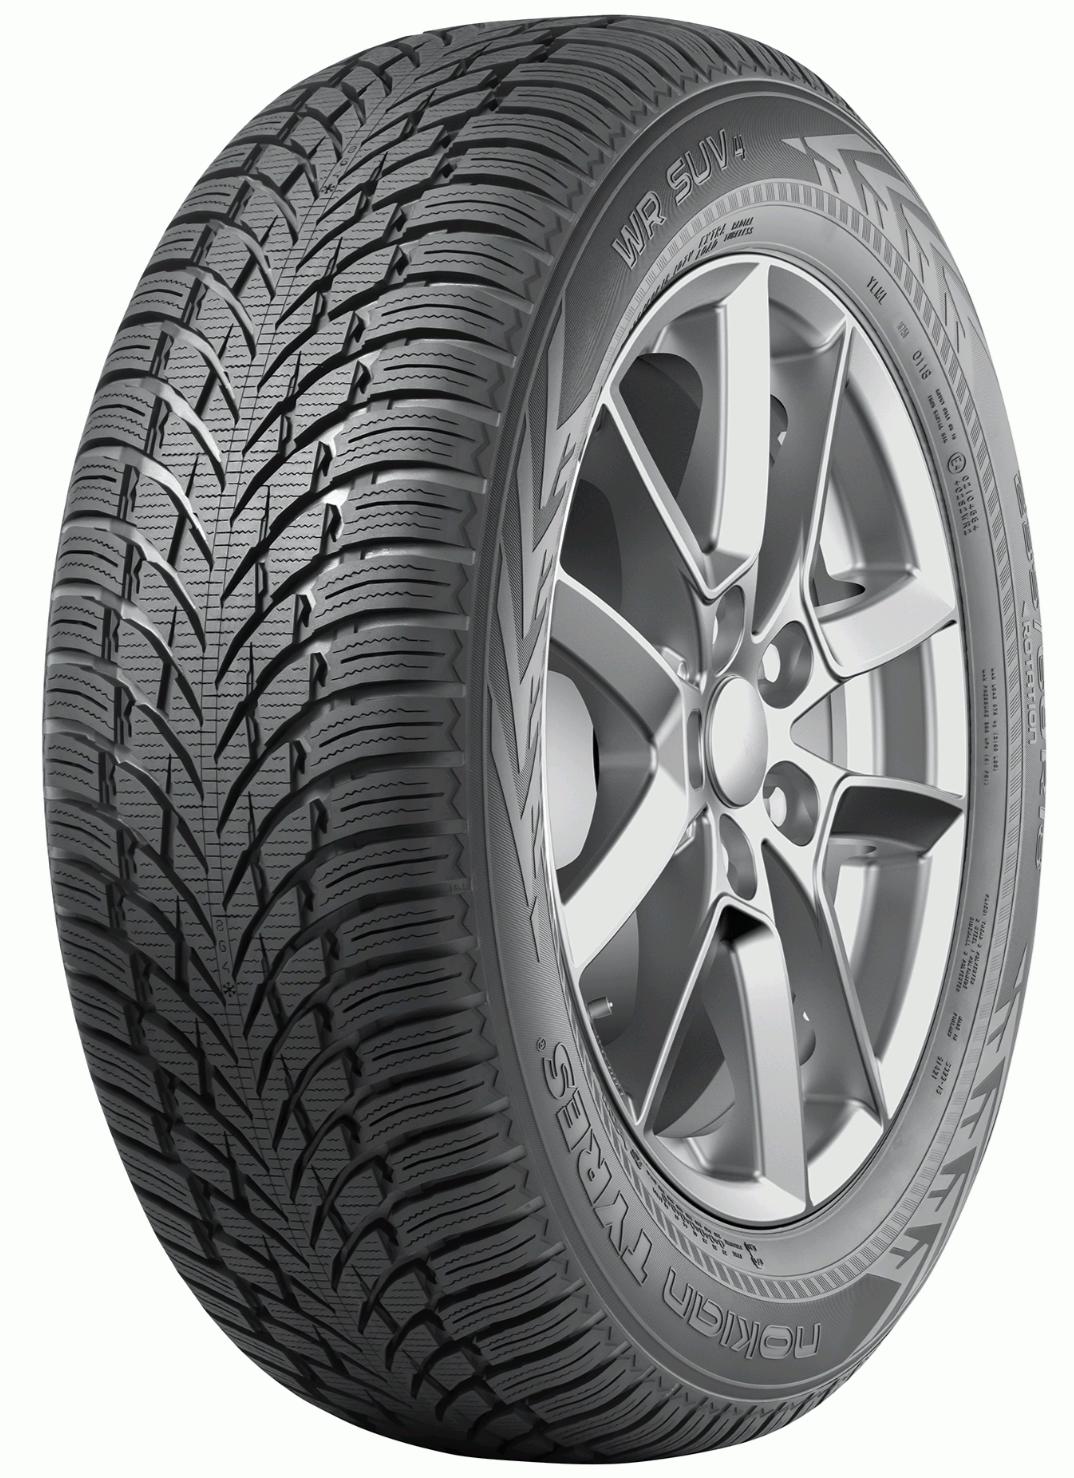 Nokian WR SUV 4 and Tire Tests - Reviews